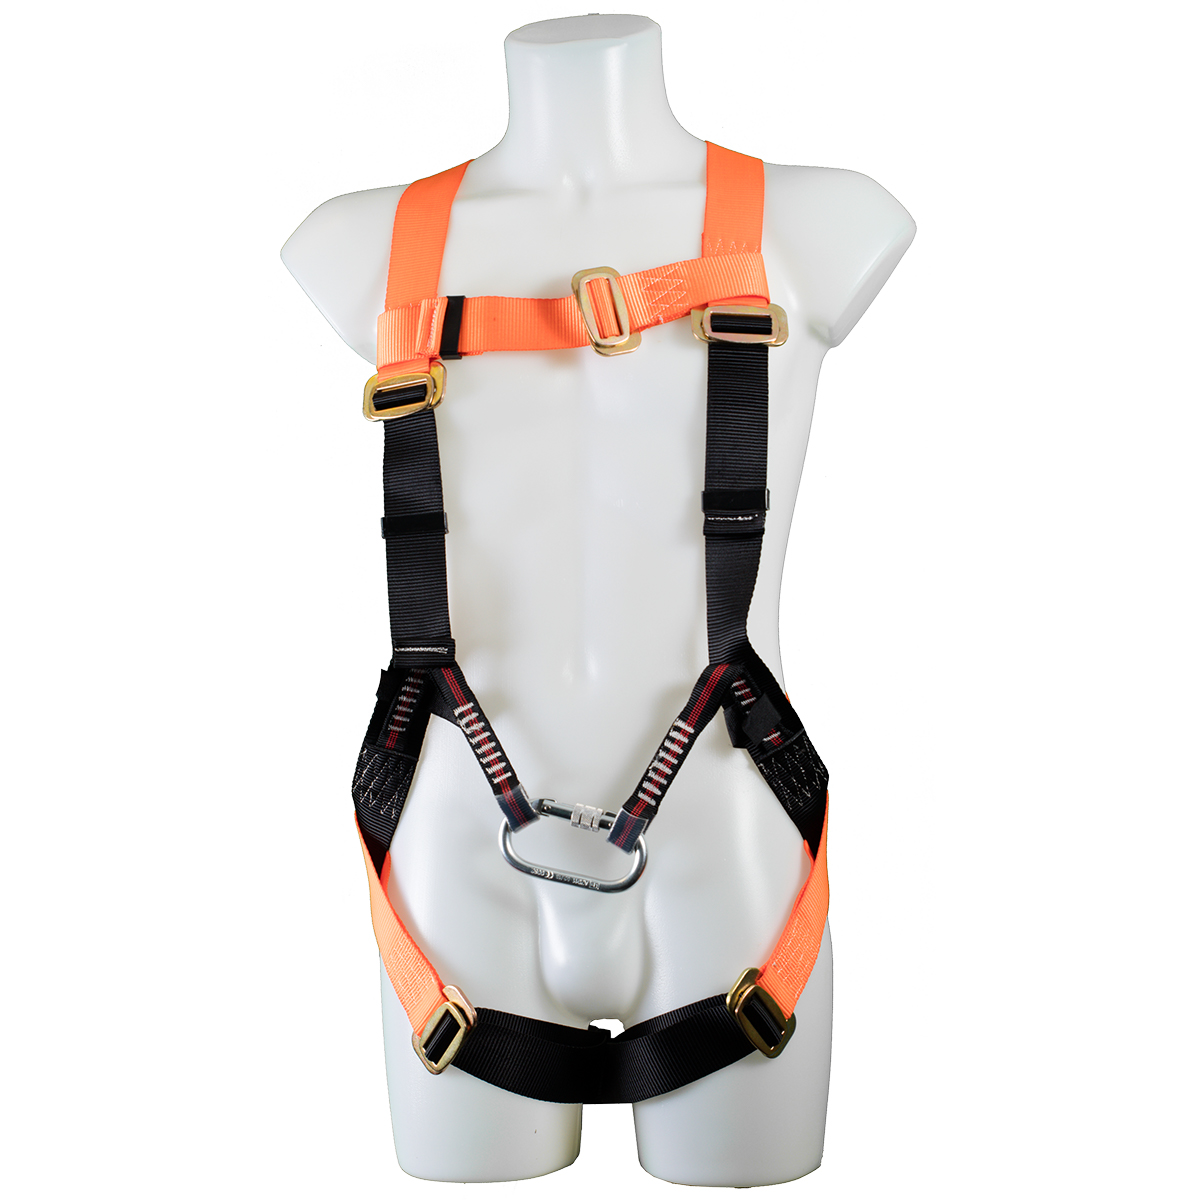 2 point safety harness